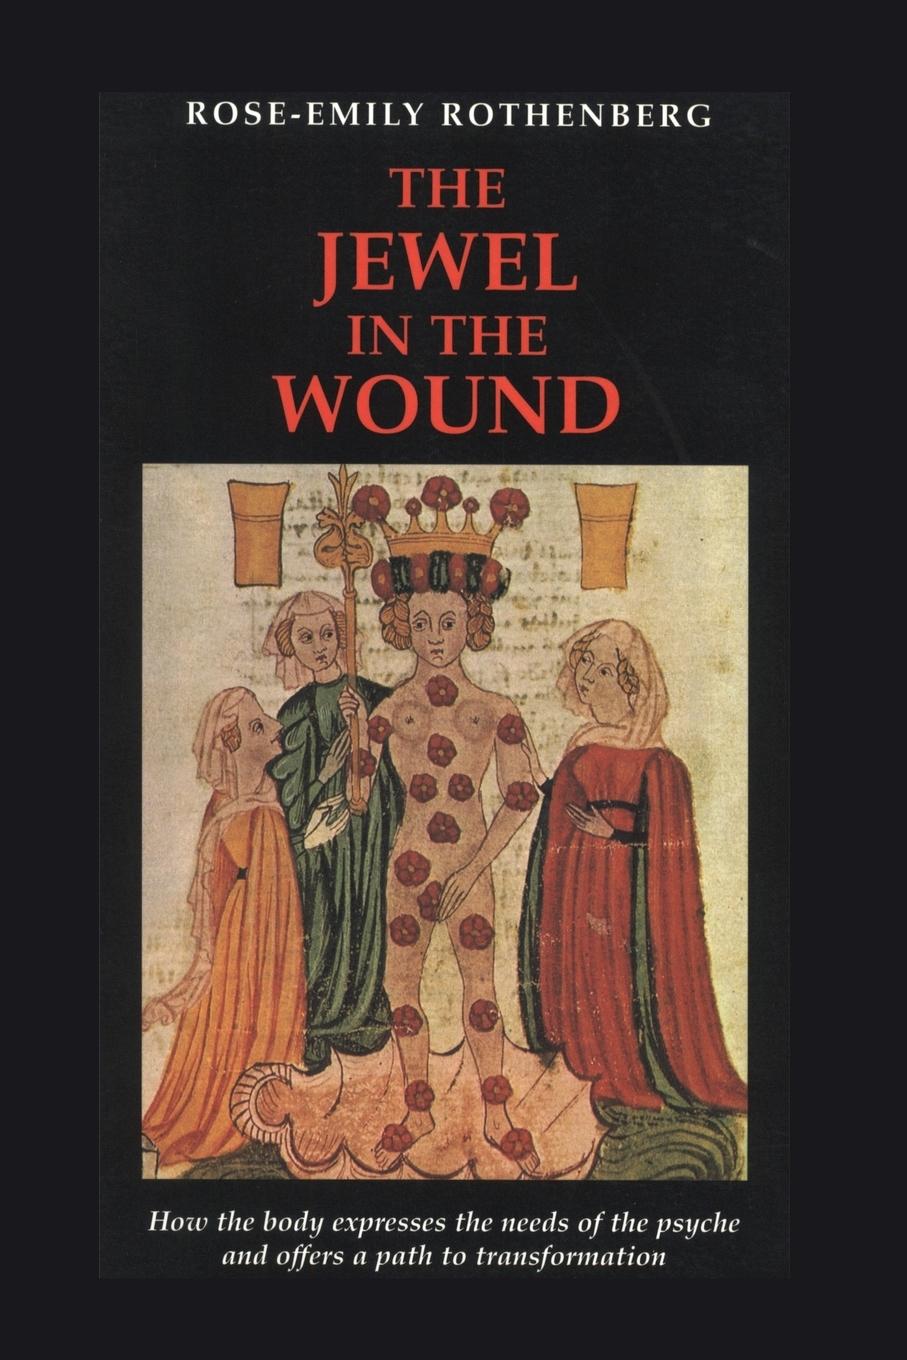 The Jewel in the Wound - Rothenberg, Rose-Emily